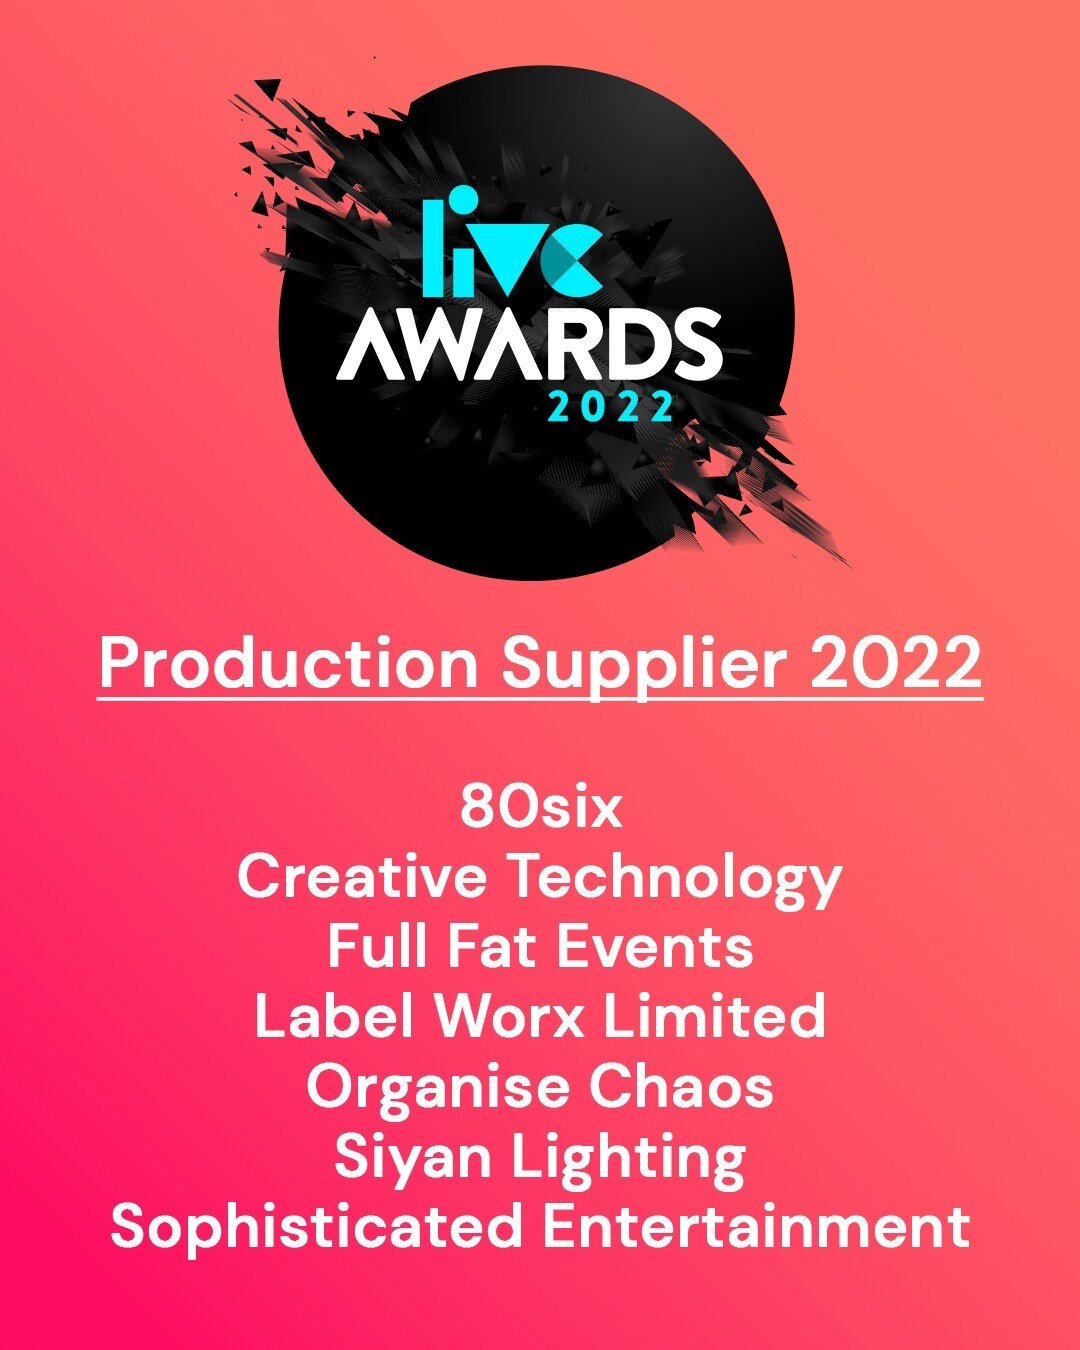 We're one of the finalists for the Production Supplier Award at this year's @theliveawards! The awards recognise excellence in the field and at the venue. We're proud to be nominated 💥